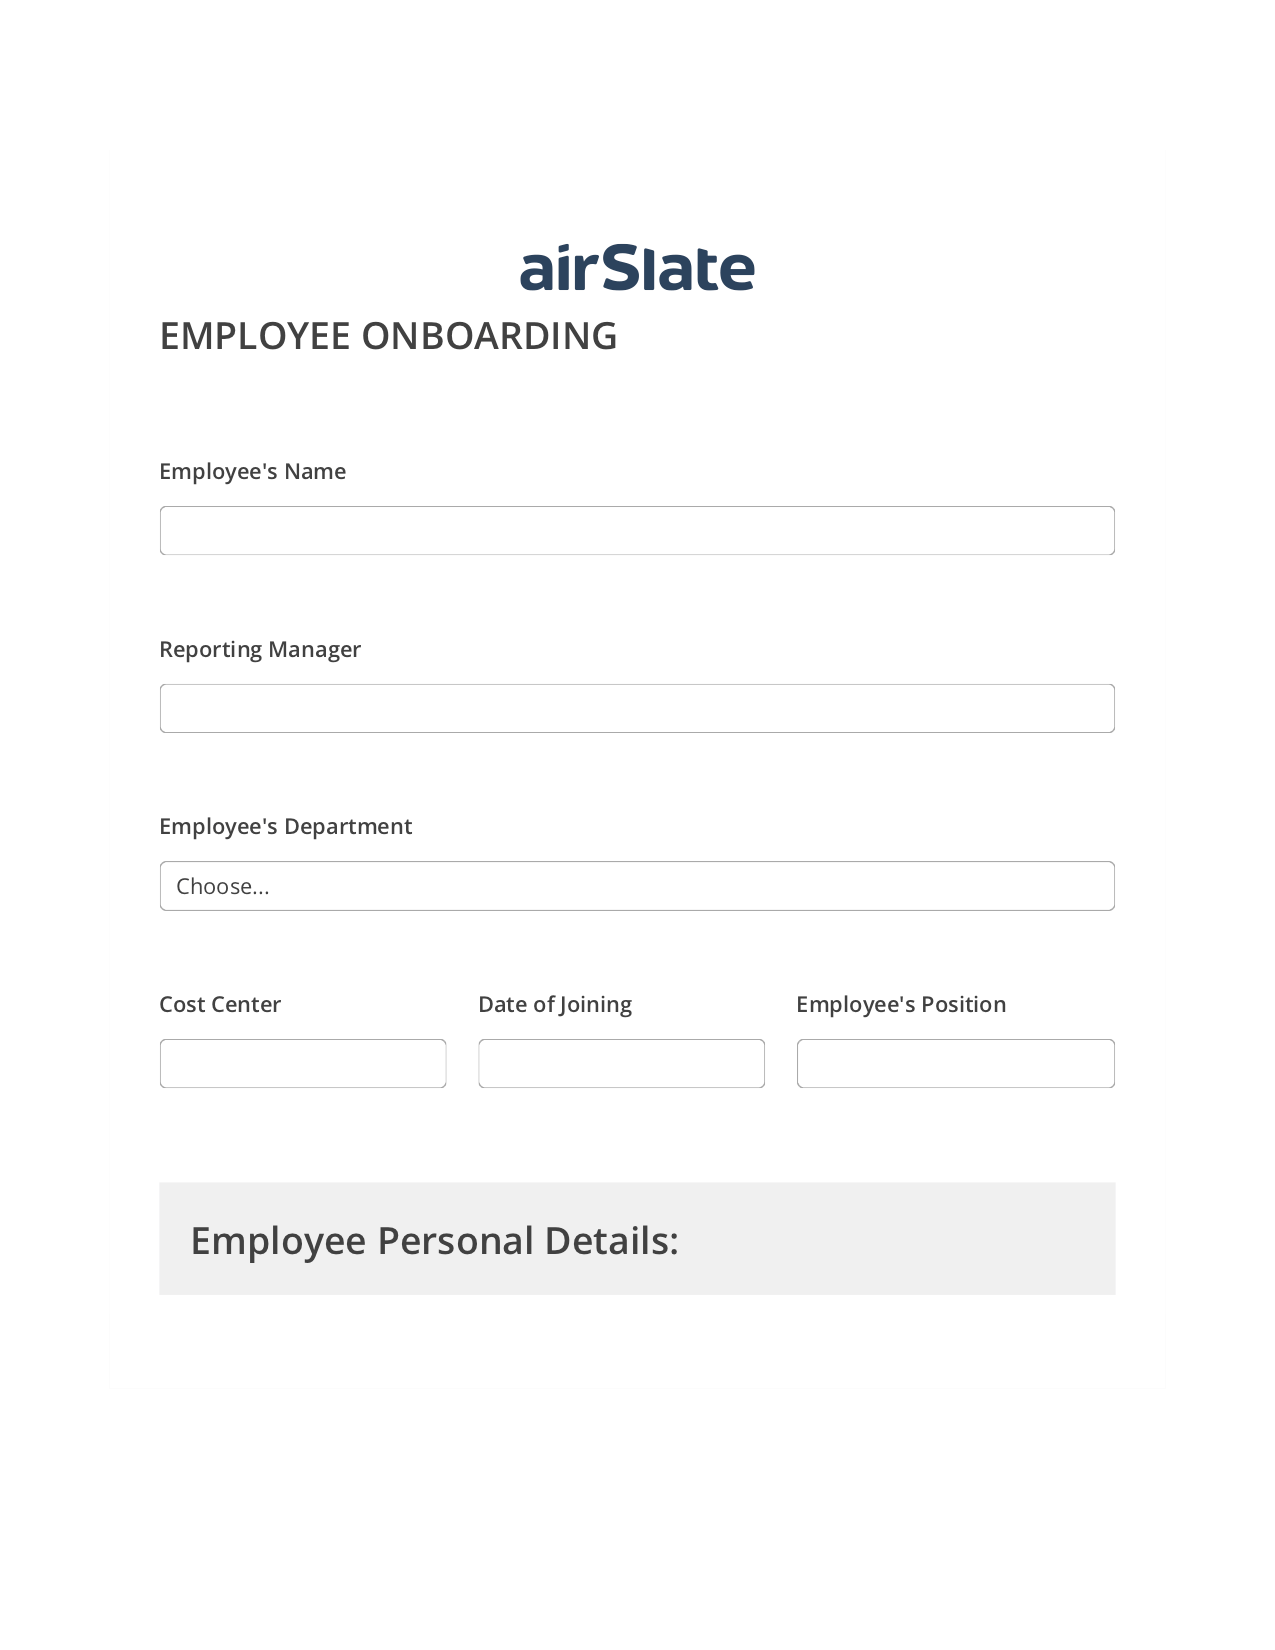 Employee Onboarding Workflow Pre-fill from Excel Spreadsheet Bot, Lock the Slate Bot, Archive to Box Bot